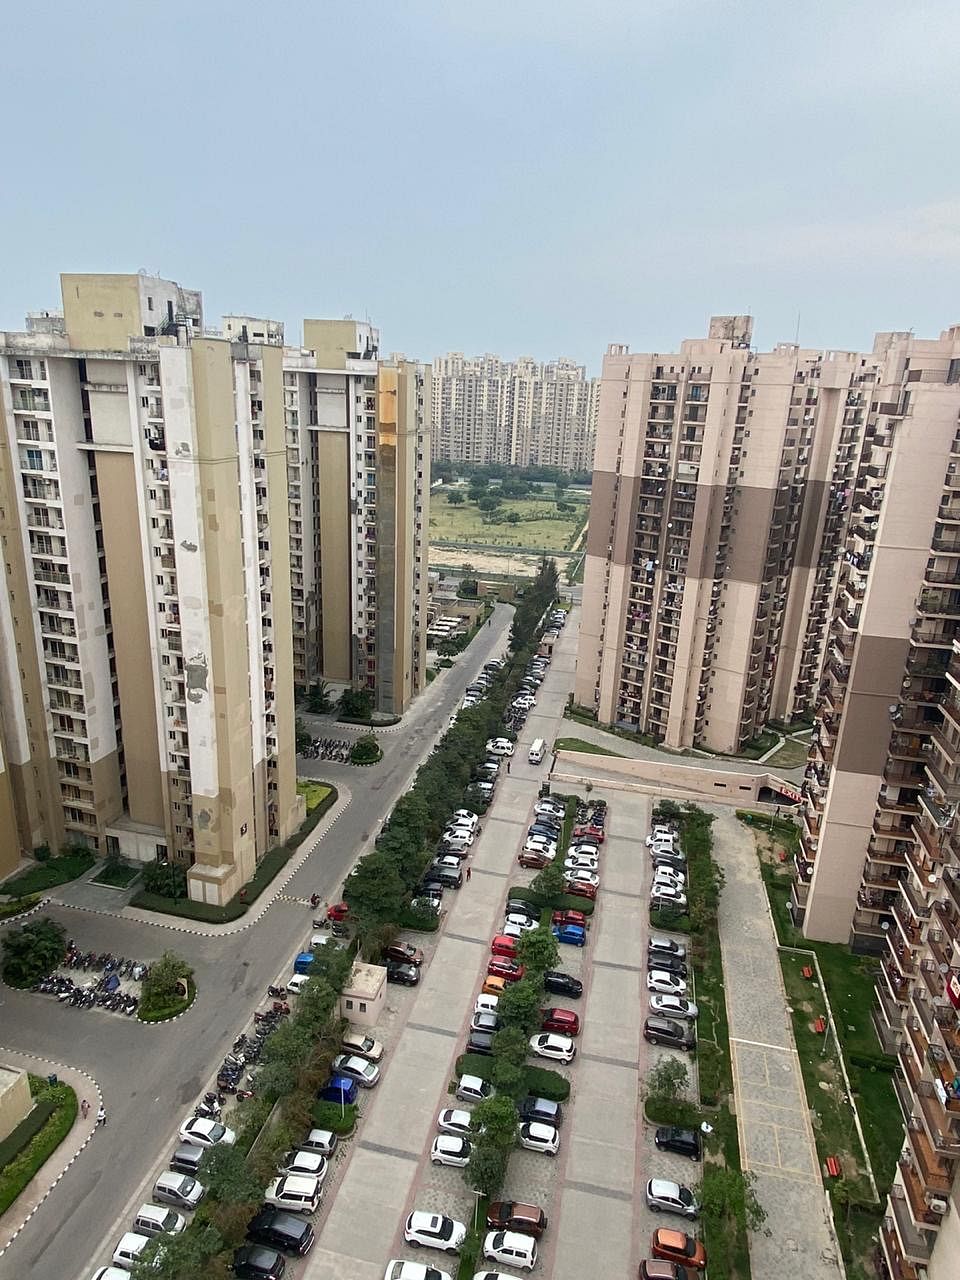 A housing society sector 137 in Noida under lockdown after one COVID-19 positive case.